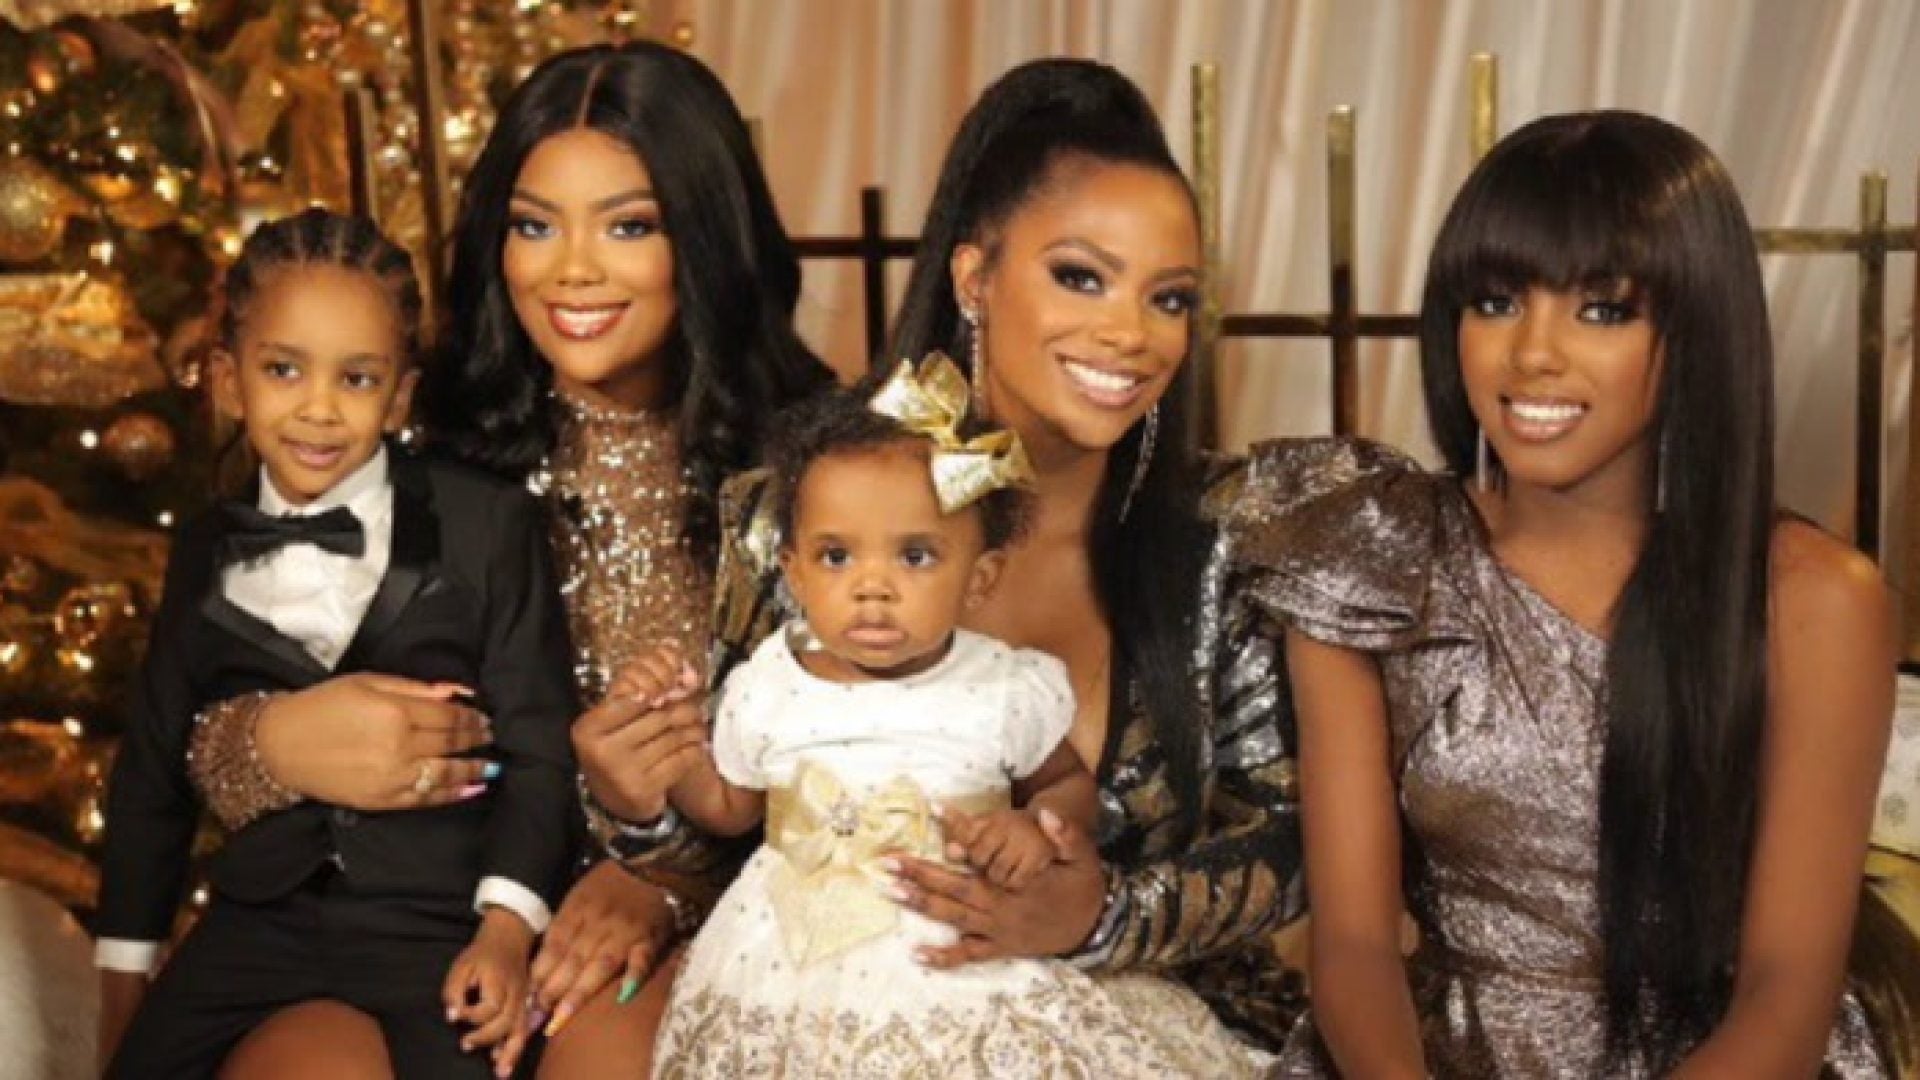 WATCH: Mommy Moments With Kandi Burrus And Her Babies